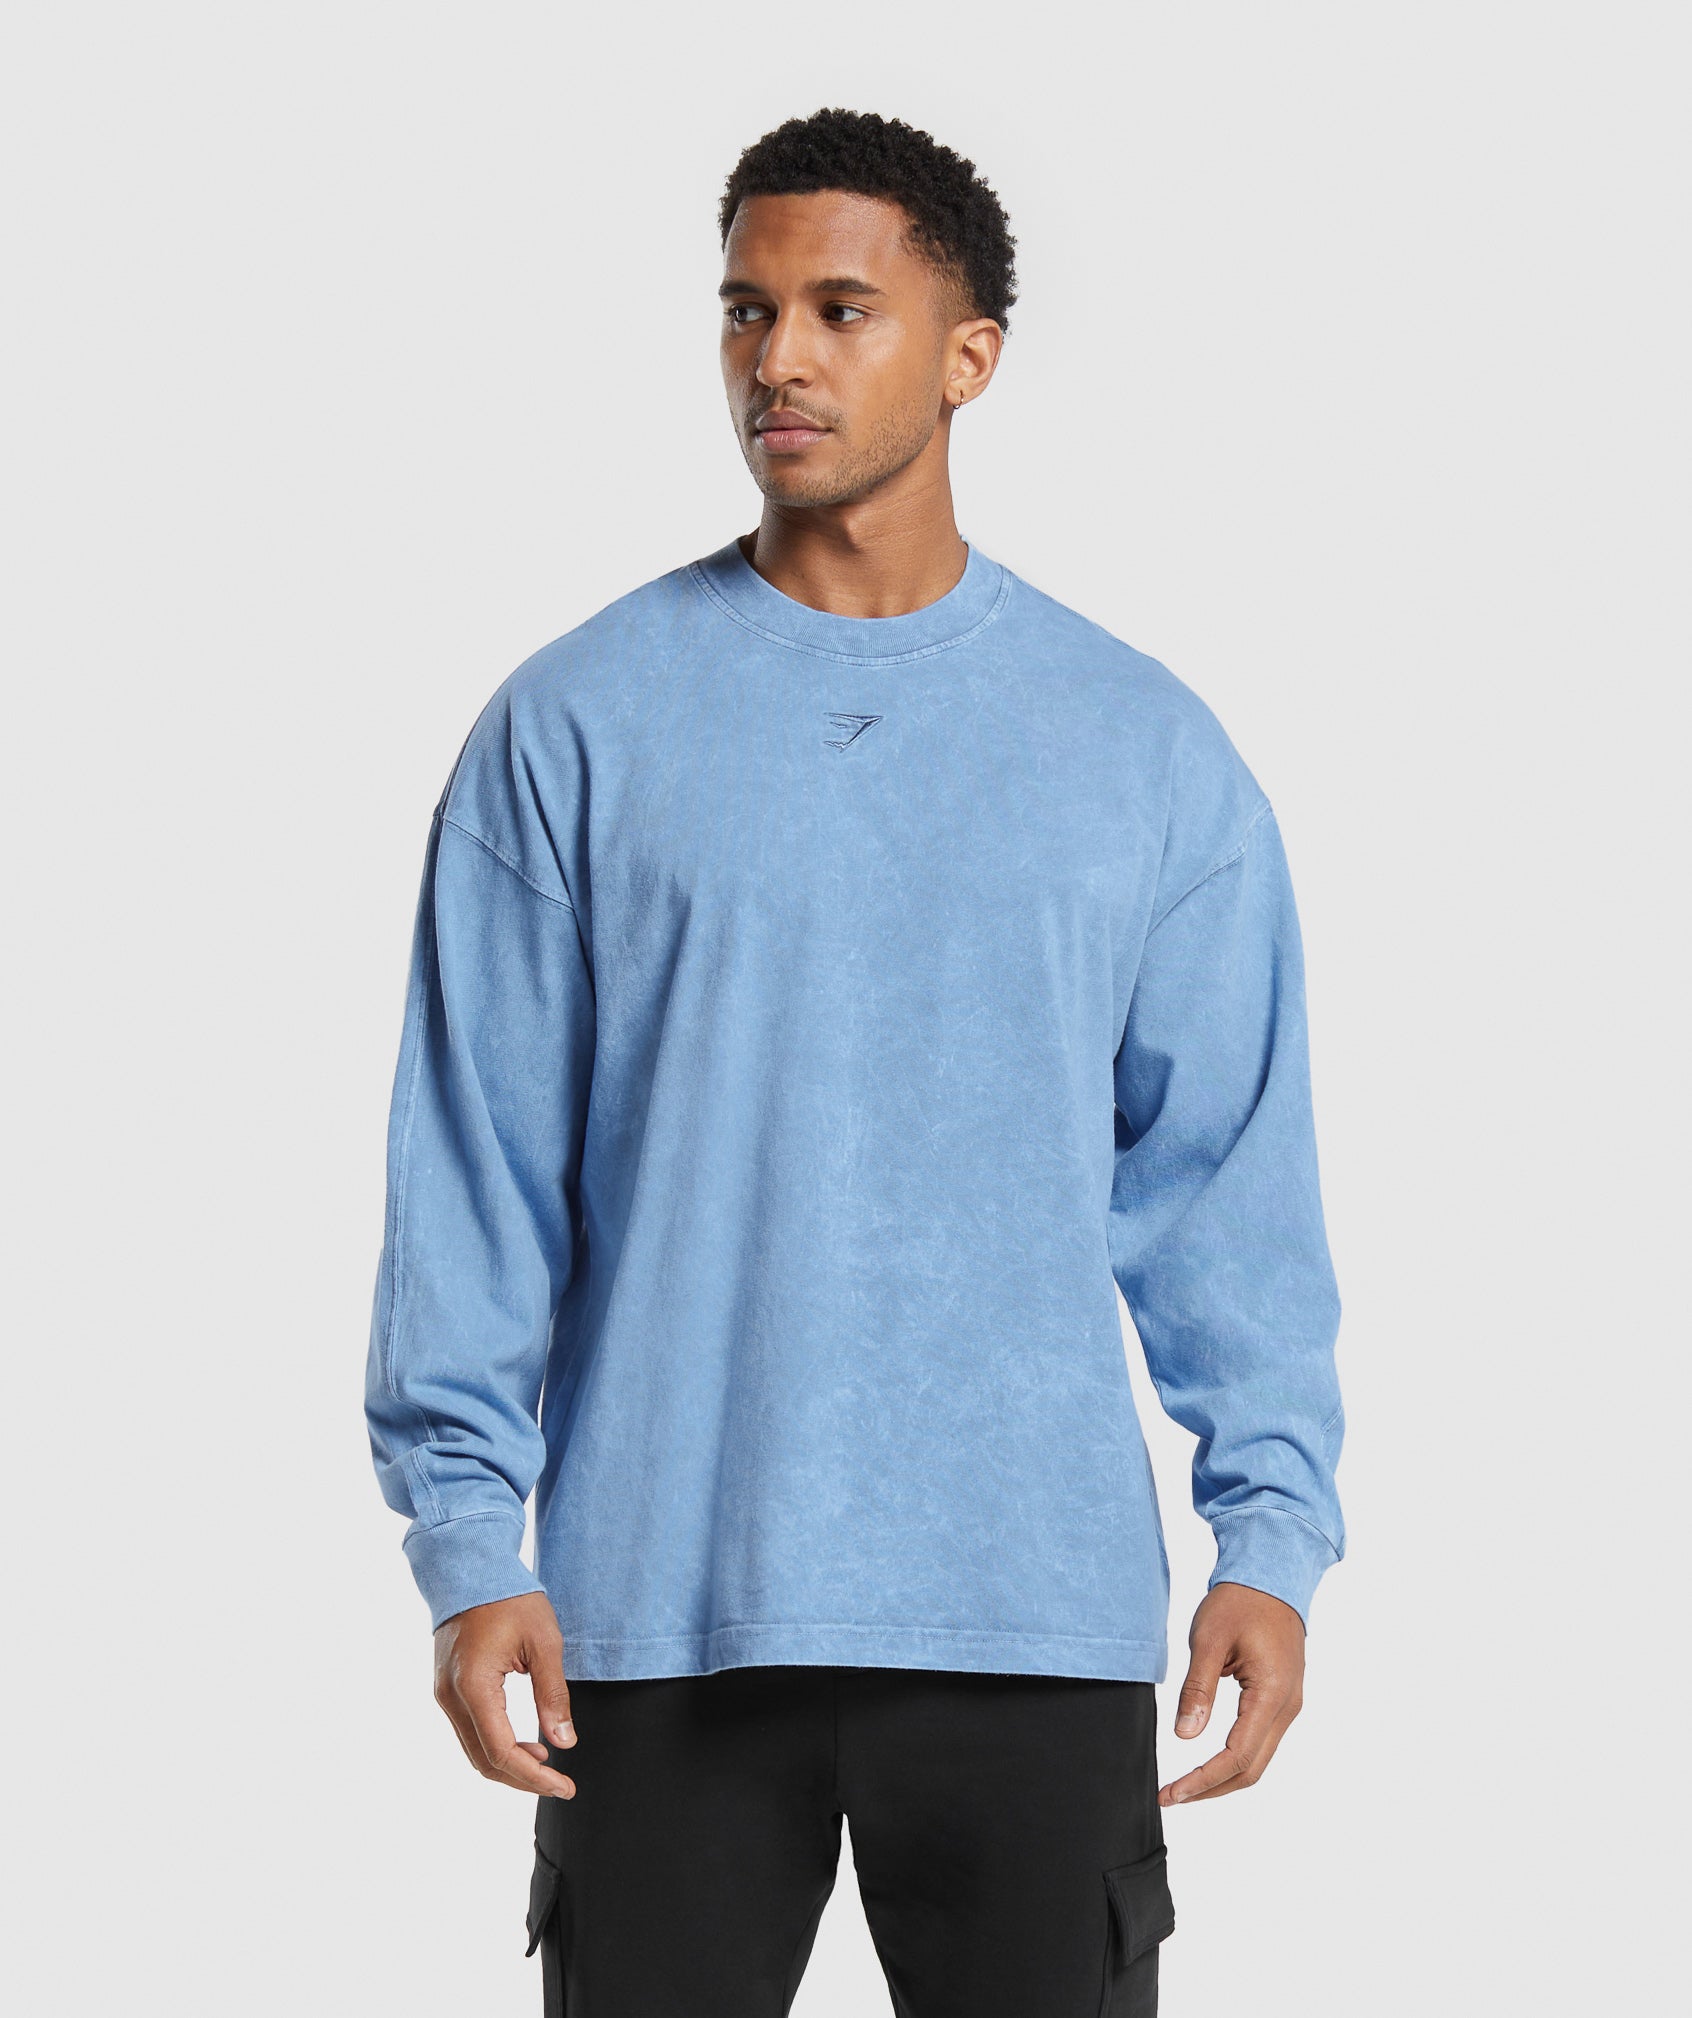 Rest Day Washed Long Sleeve T-Shirt in Faded Blue - view 1